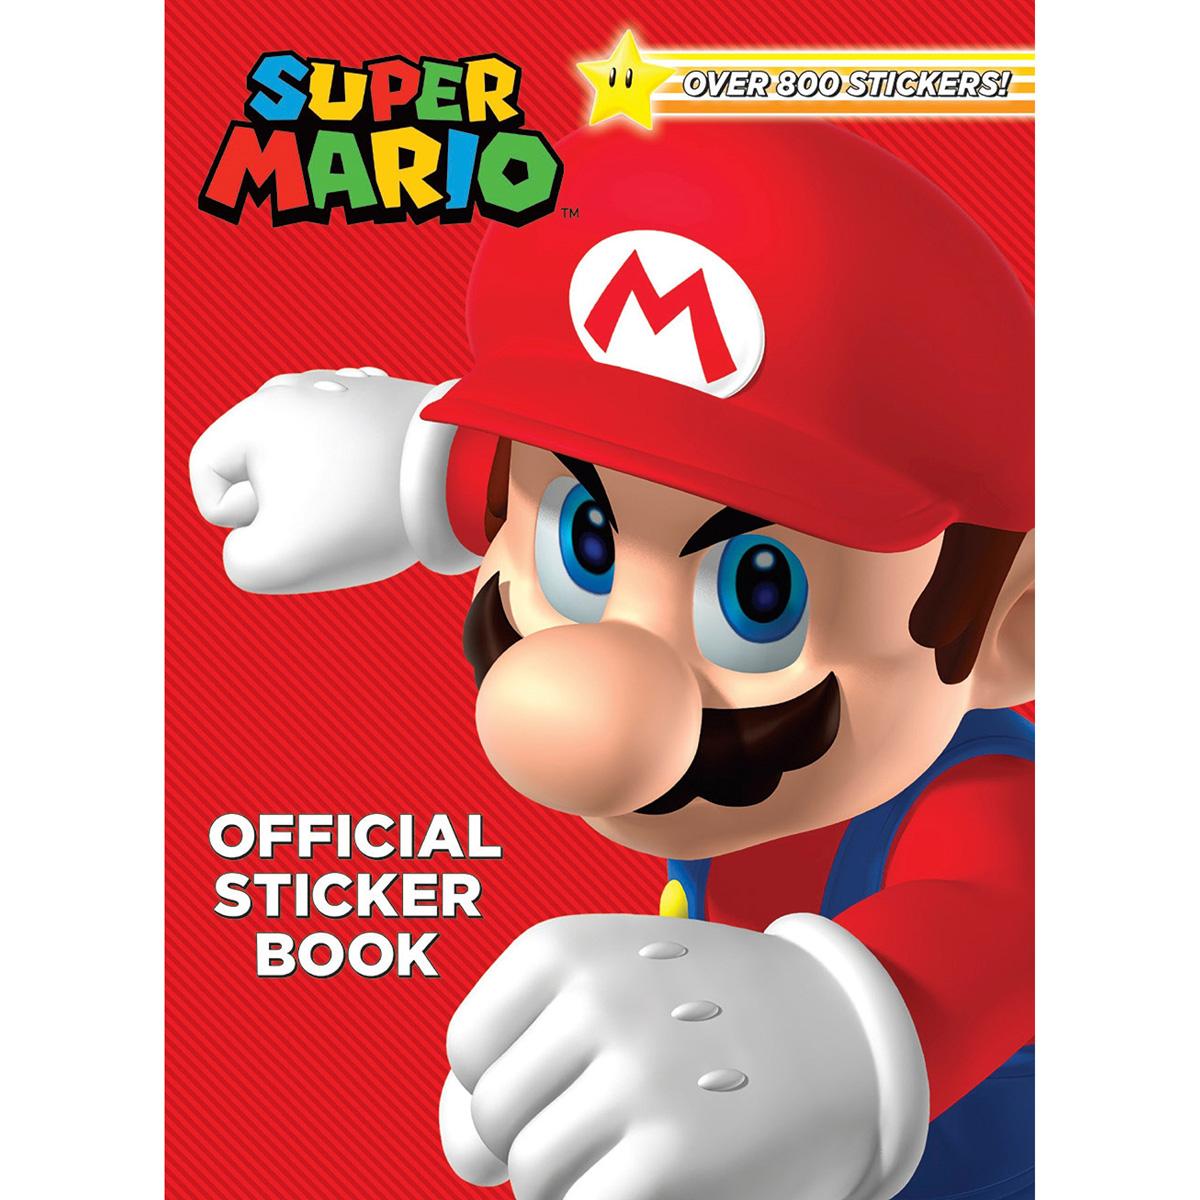 Super Mario Official Sticker Book by Steve Foxe Paperback for $4.81